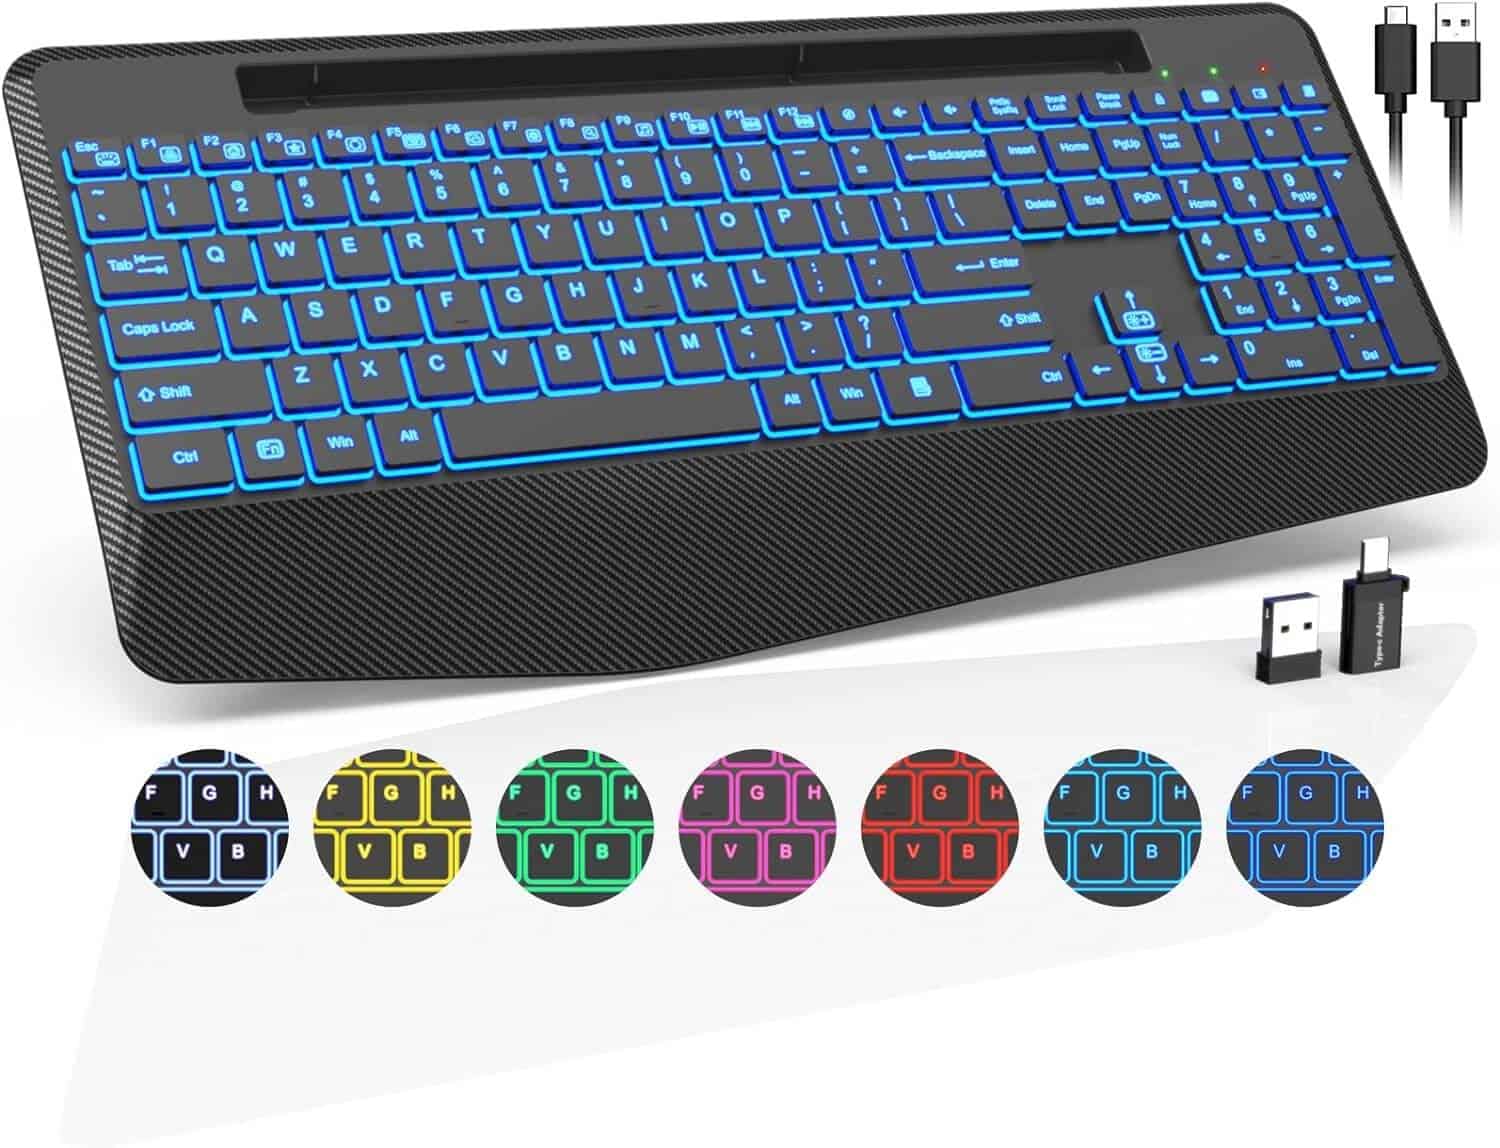 Top gaming keyboard for teenage boys with multiple color options